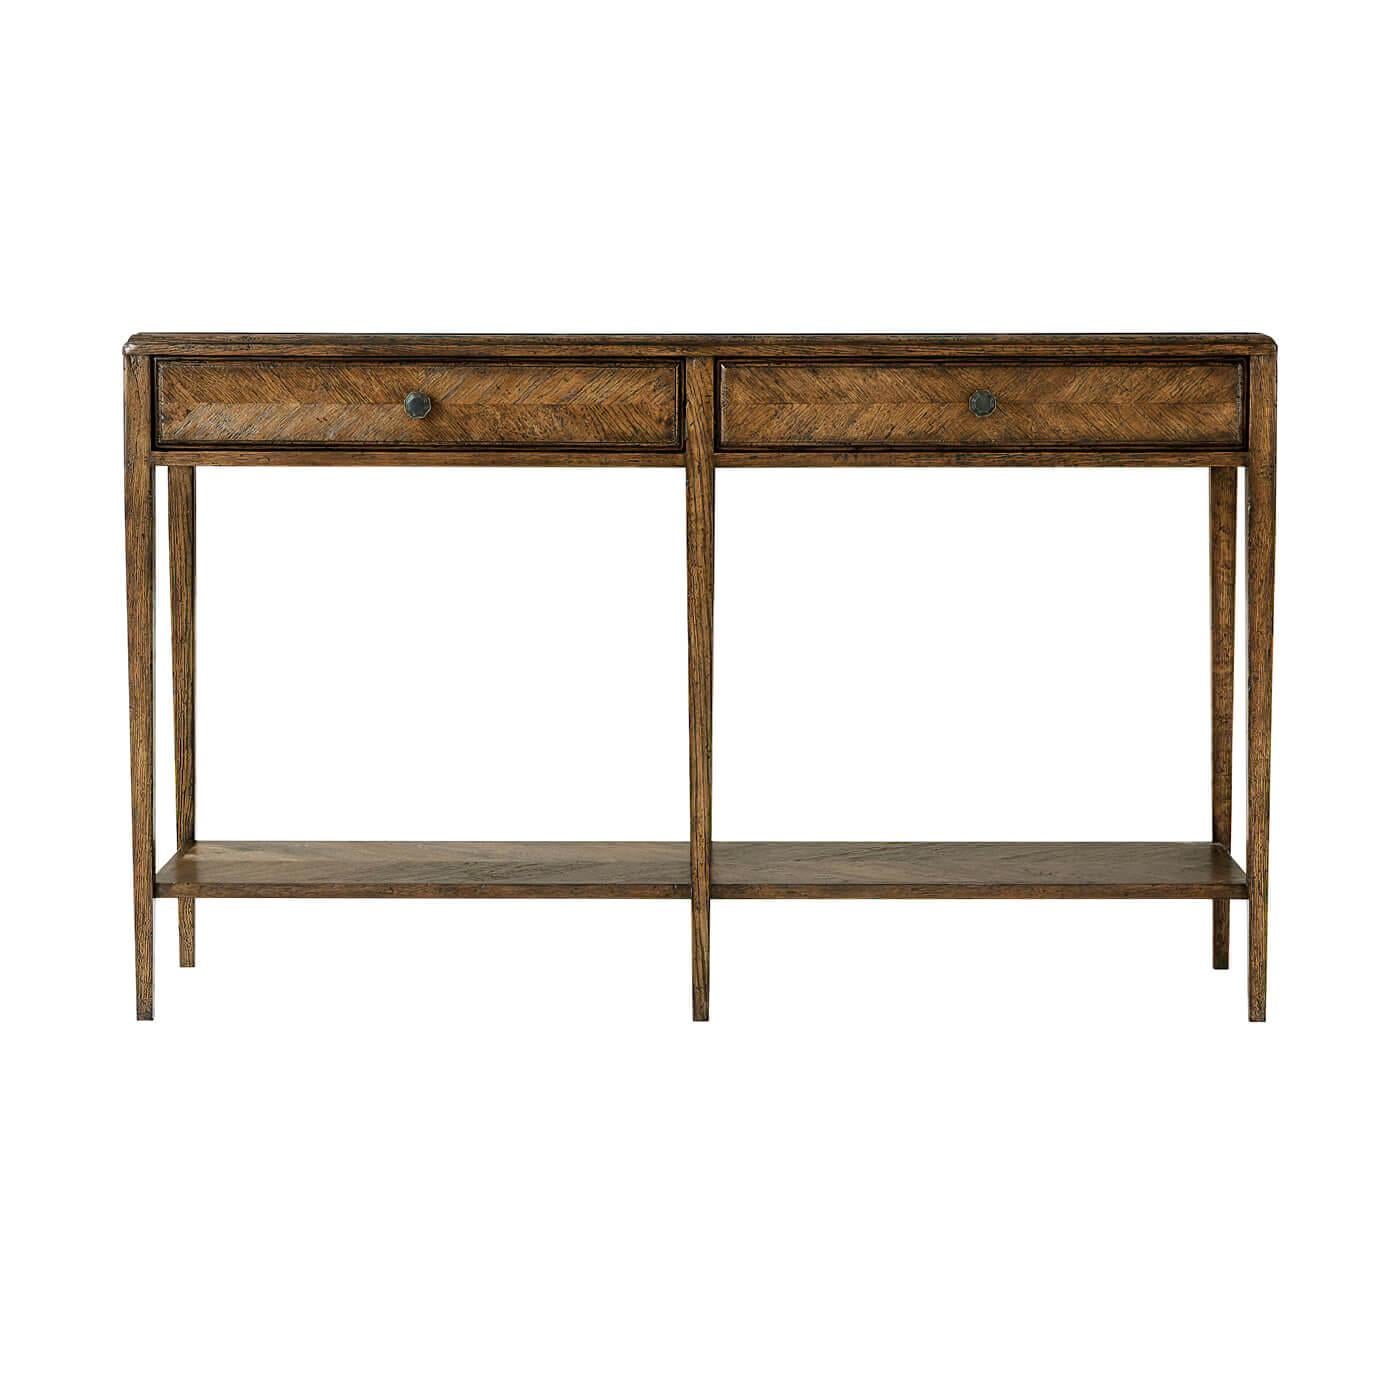 An Italian neo-classic style oak parquetry two-drawer console table accentuated with tapered legs. This beautiful two-tiered herringbone console table includes a rectangular oak parquetry top and two frieze drawers accented with Verde Bronze